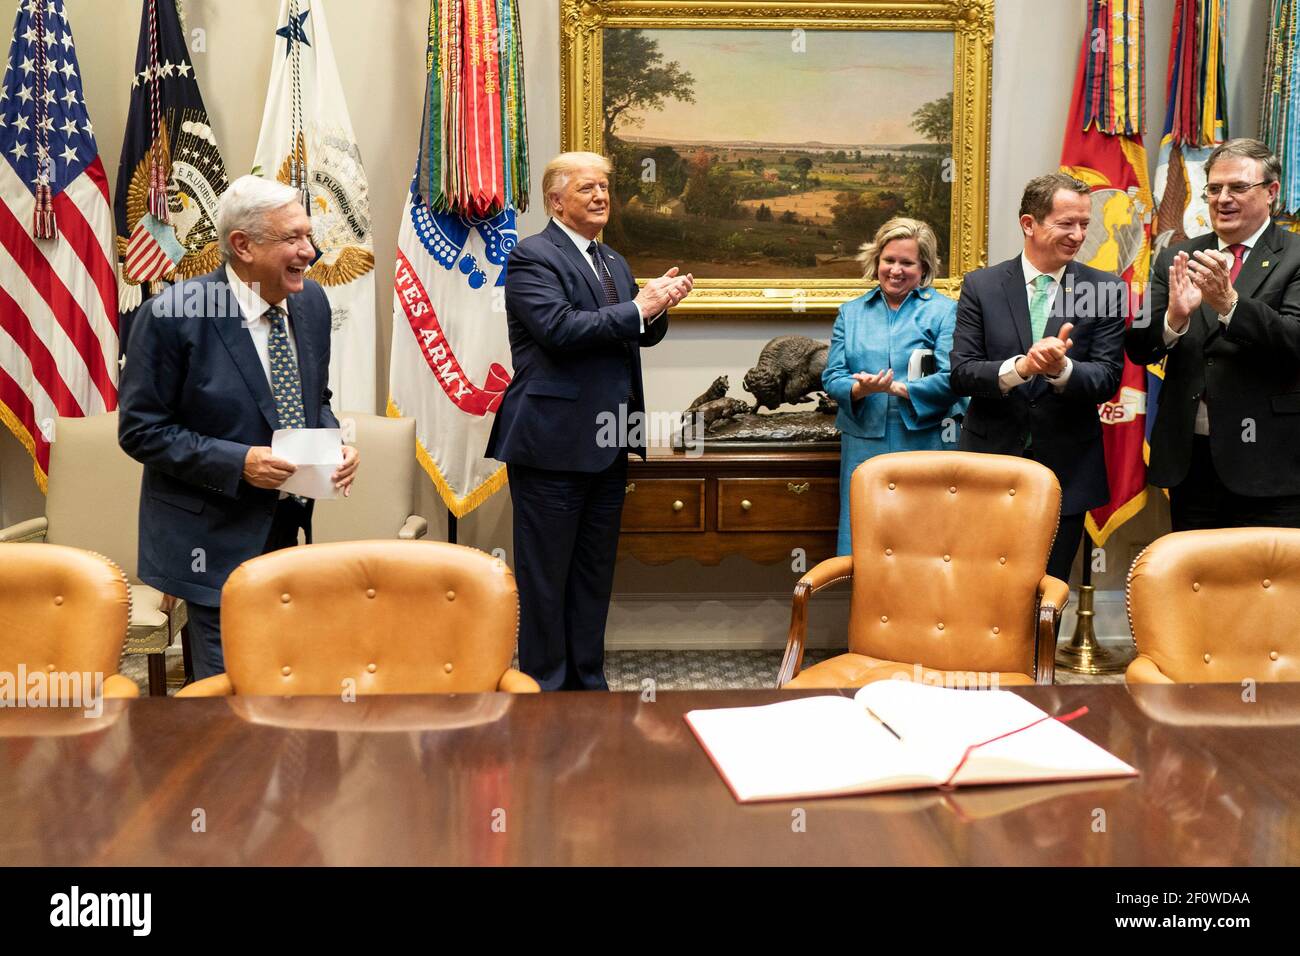 President Donald Trump applauds the President of the United Mexican States Andres Manuel Lopez Obrador and members of his delegation Wednesday July 8 2020 in the Roosevelt Room of the White House. Stock Photo